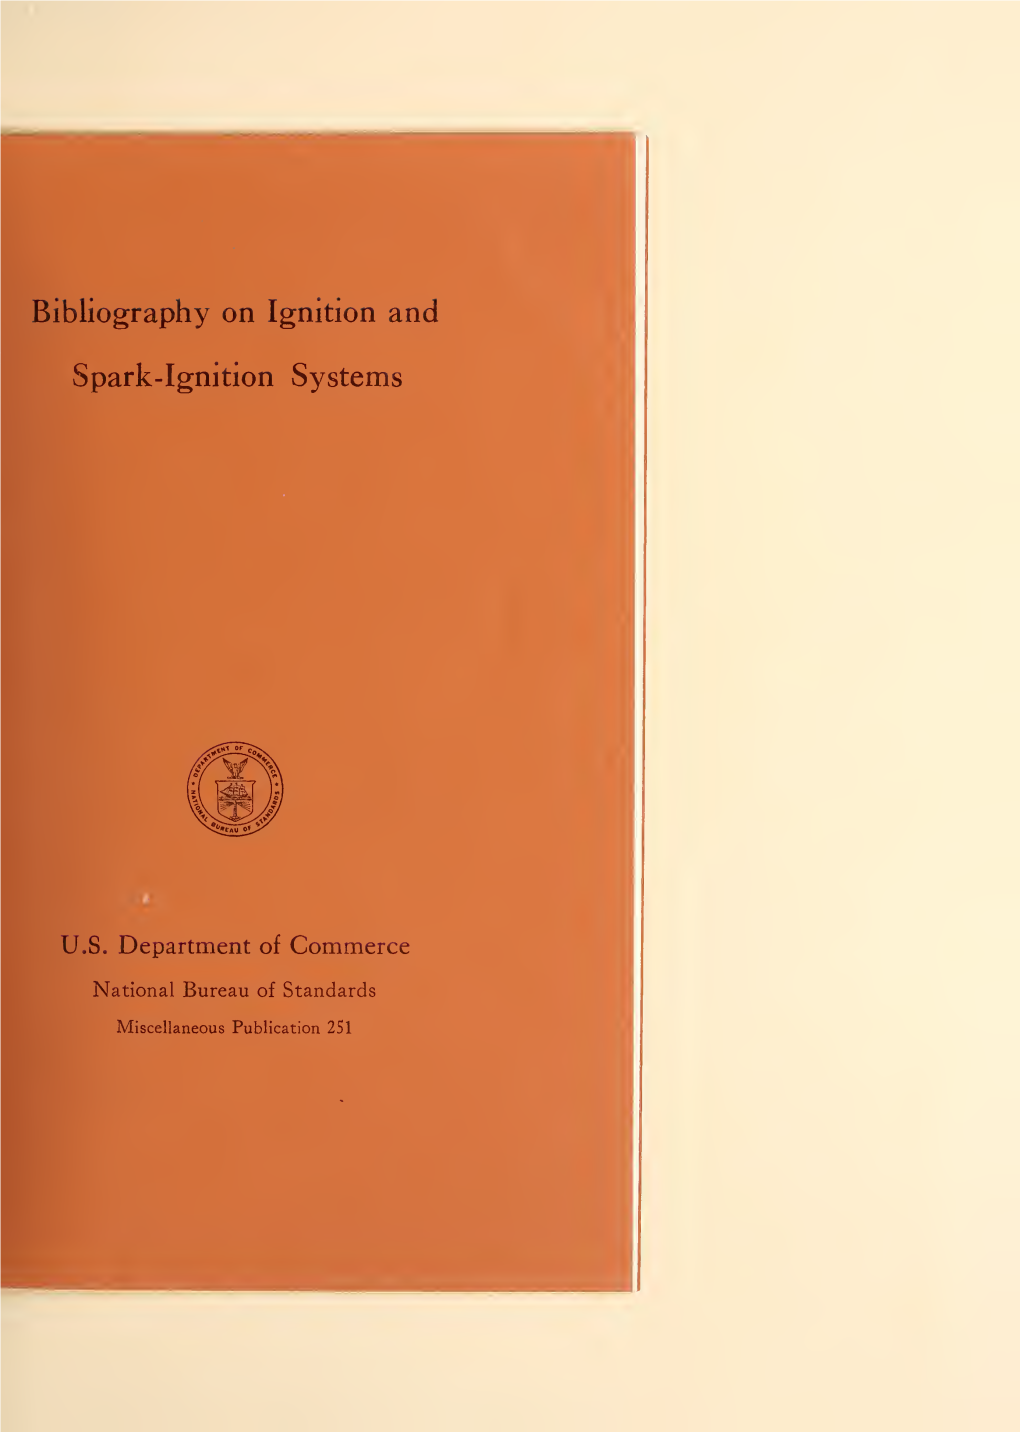 Bibliography on Ignition and Spark-Ignition Systems